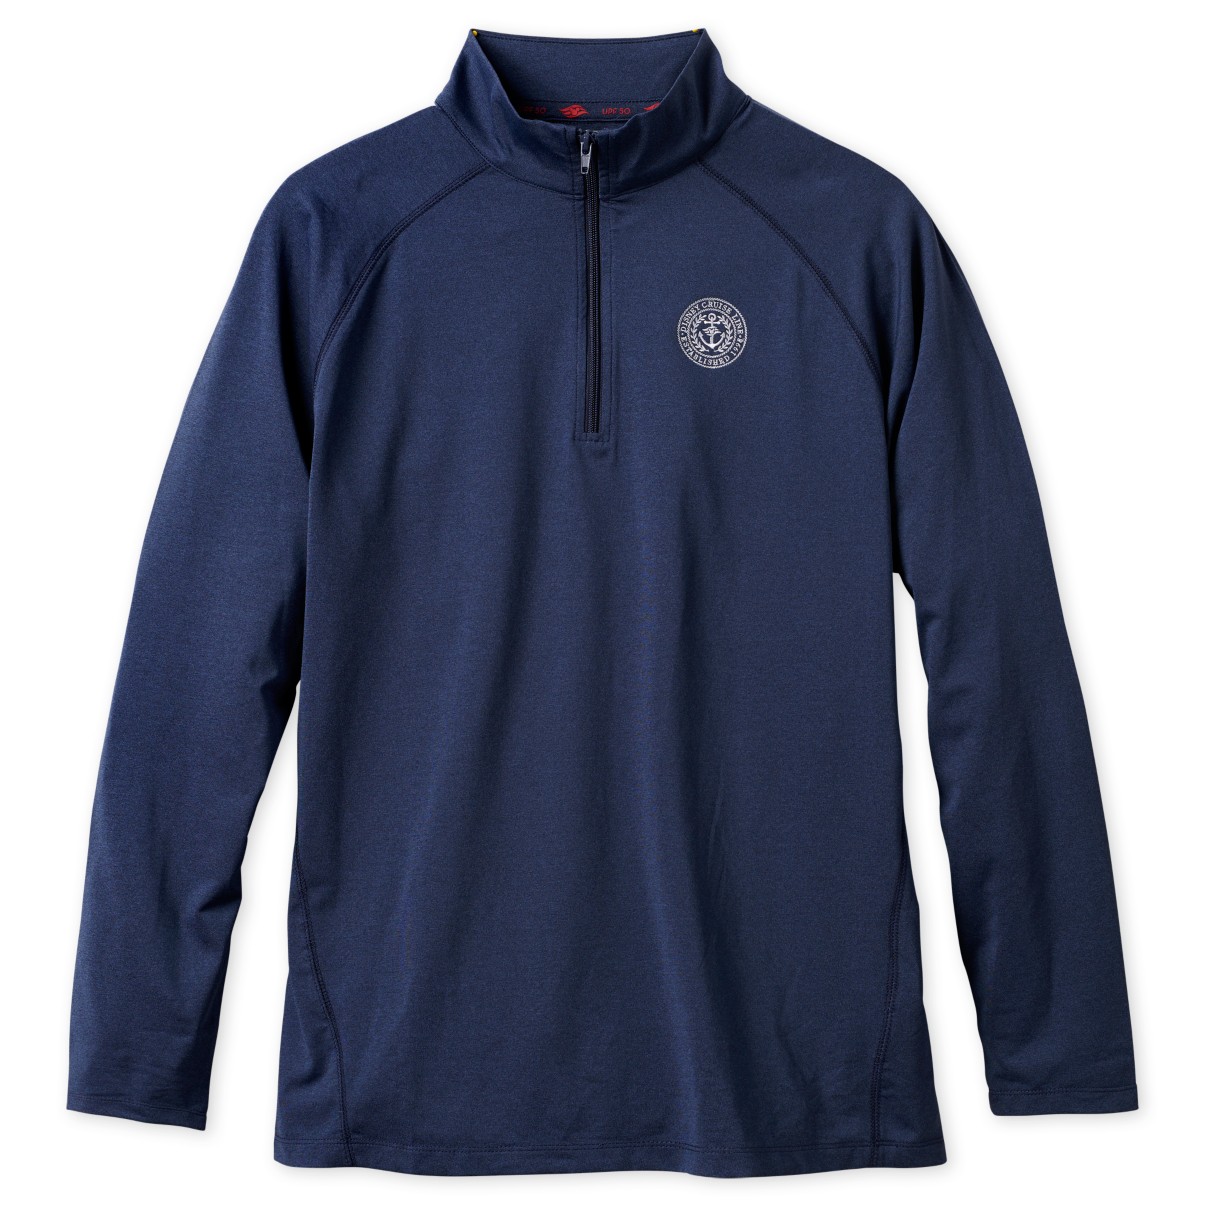 Disney Cruise Line Zip Top for Adults